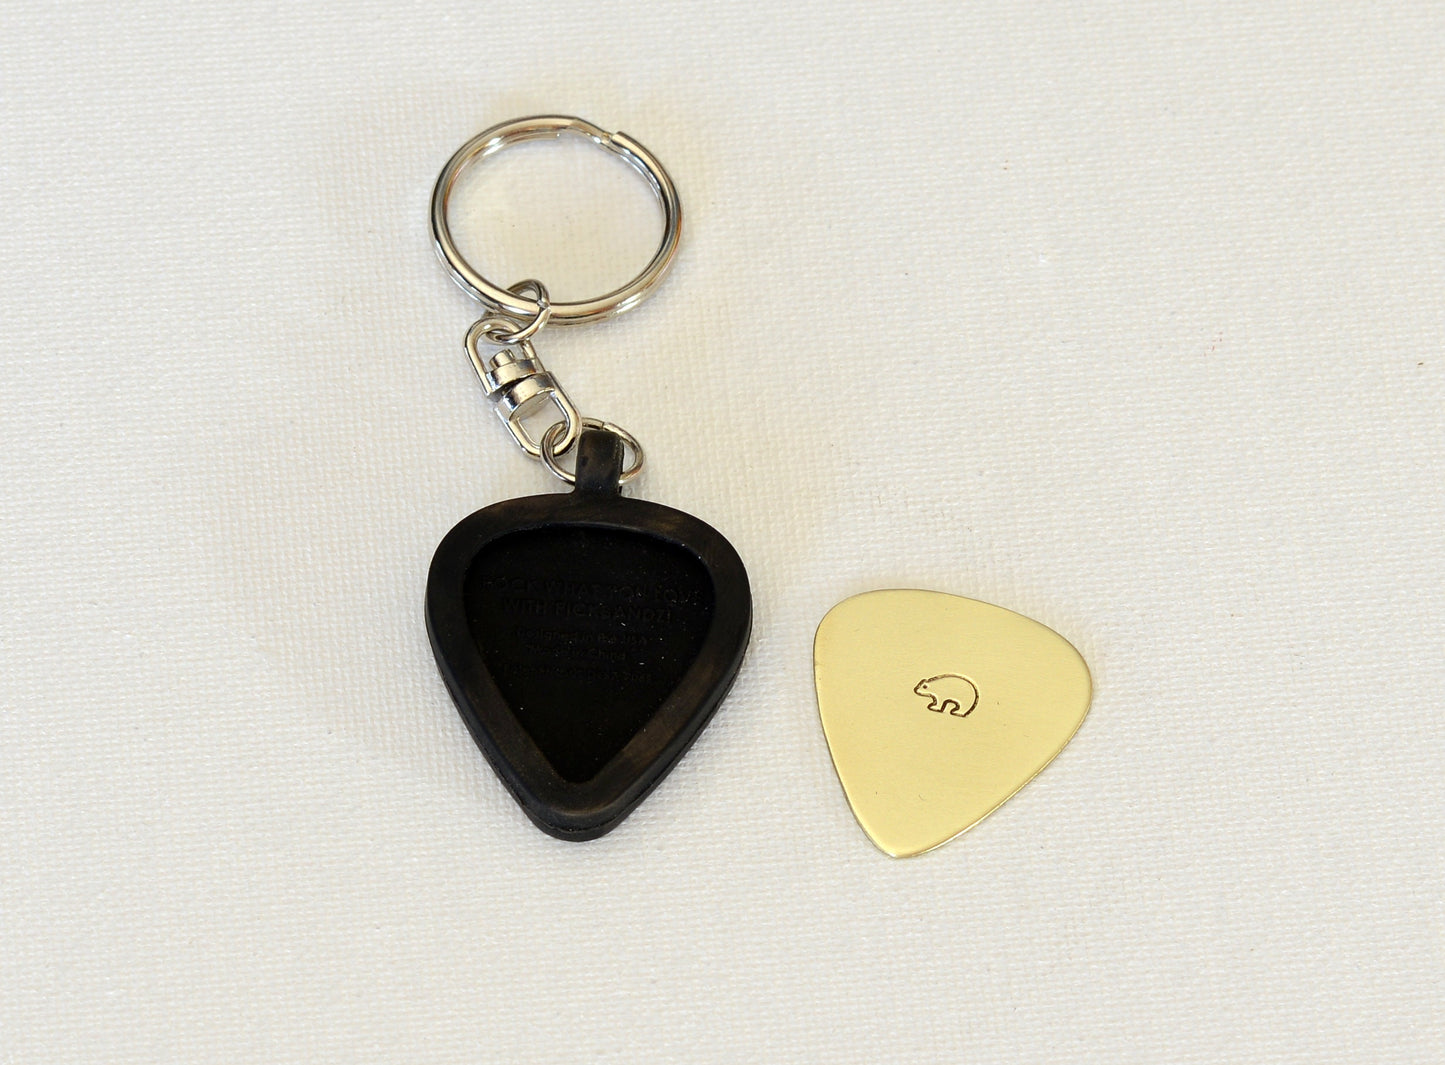 Brass guitar pick and a rubber guitar pick holder keychain